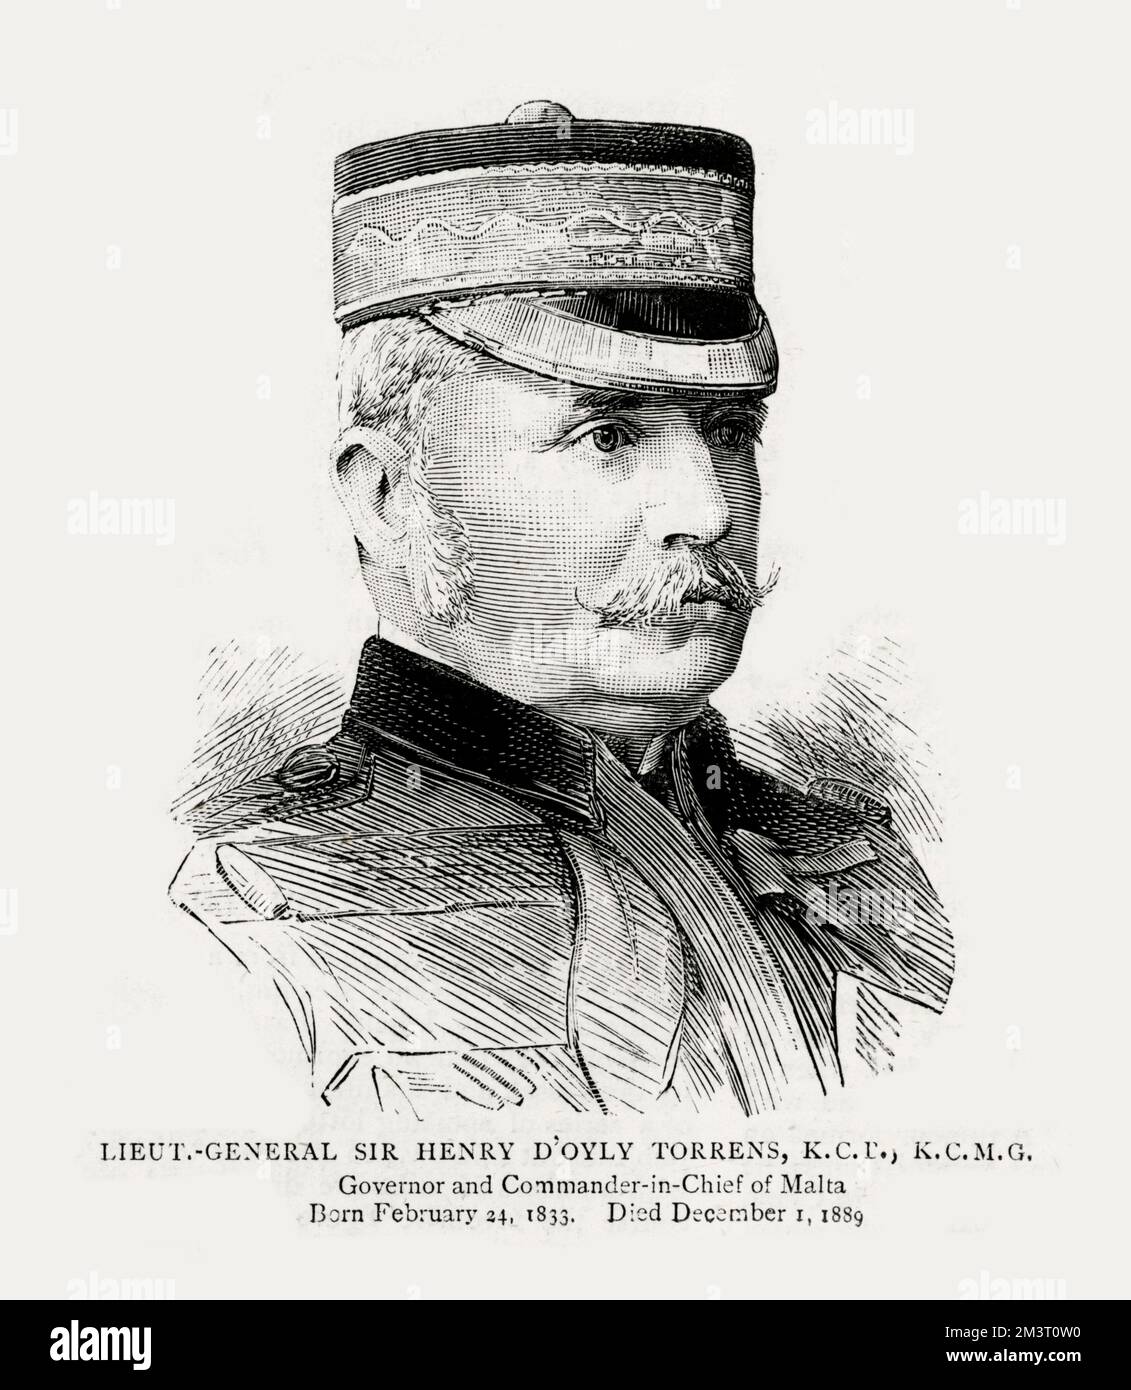 Lieutenant General Sir Henry D'Oyley Torrens - Governor and Commander-in-Chief of Malta (1833-1889). Stock Photo